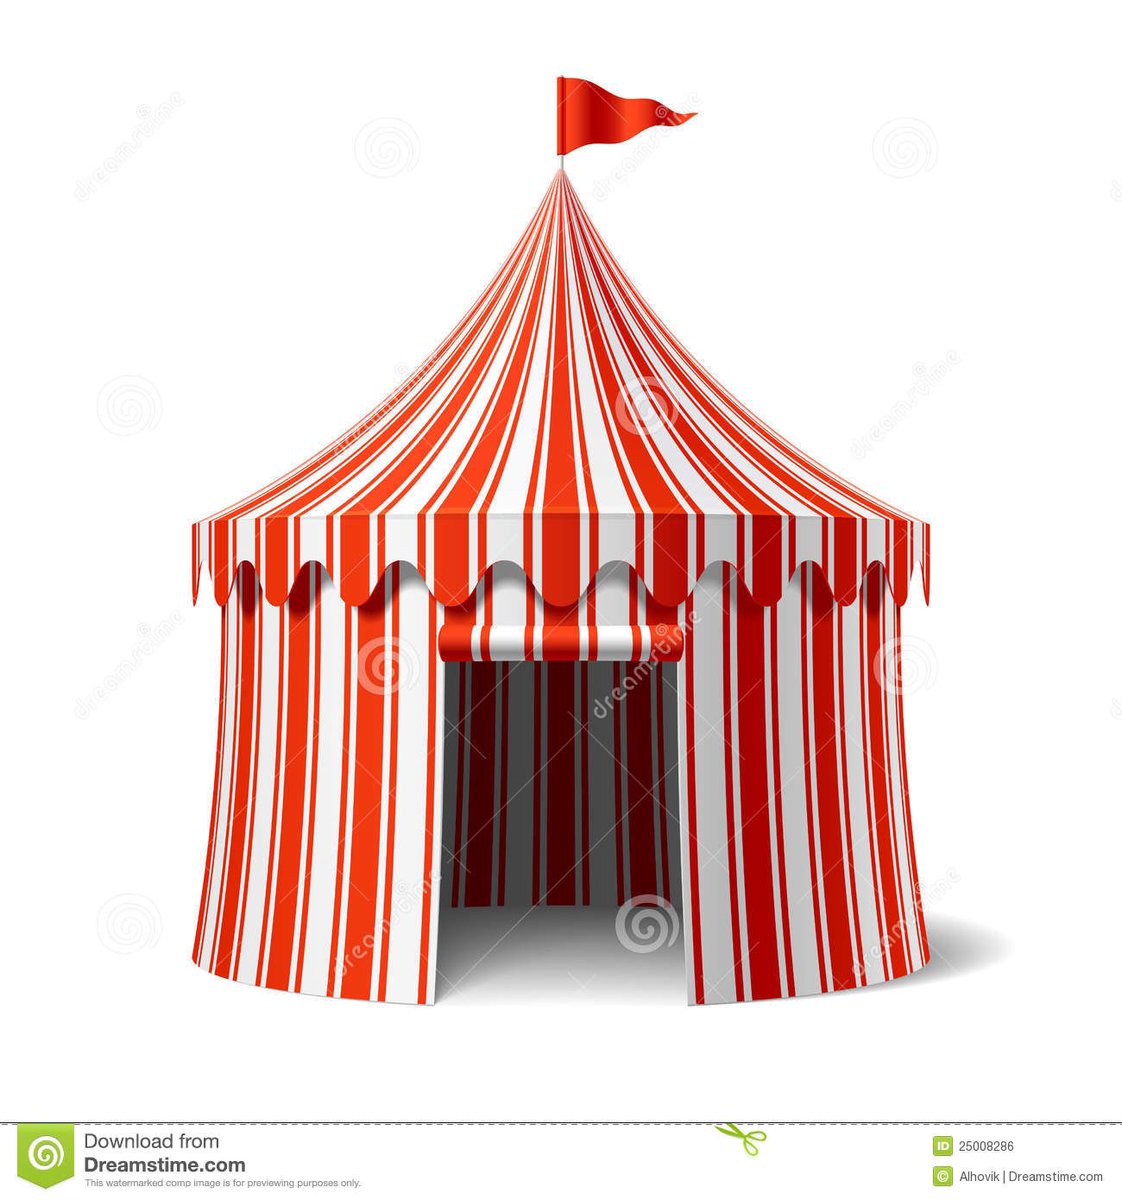 a thread of things that belong in the circus ;